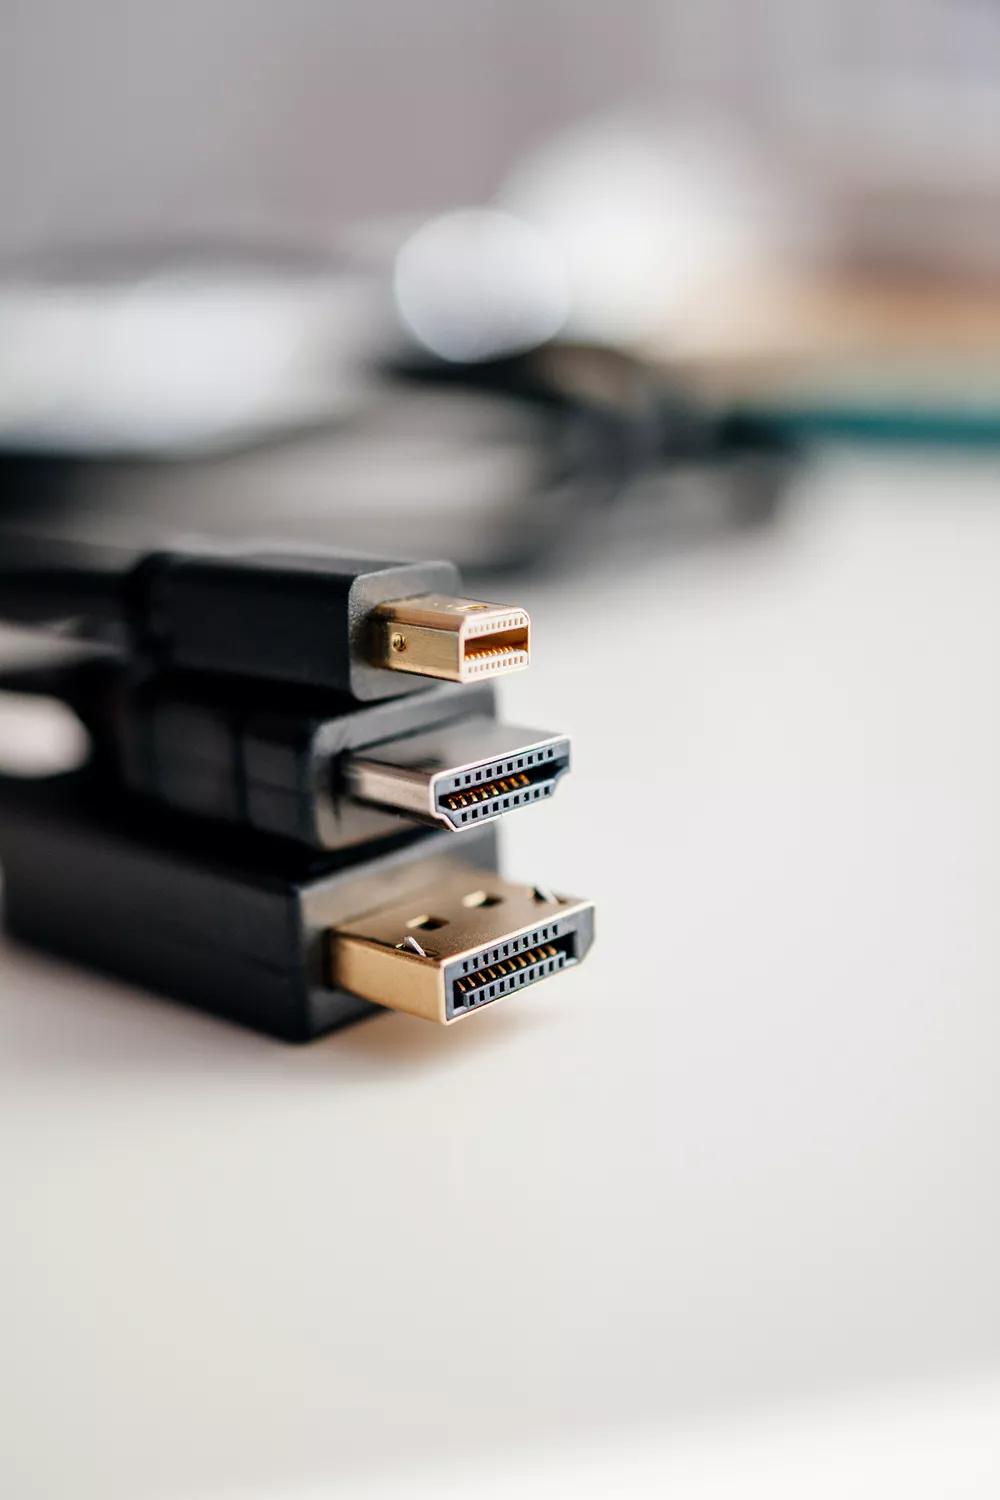 DisplayPort vs What is the - Barco